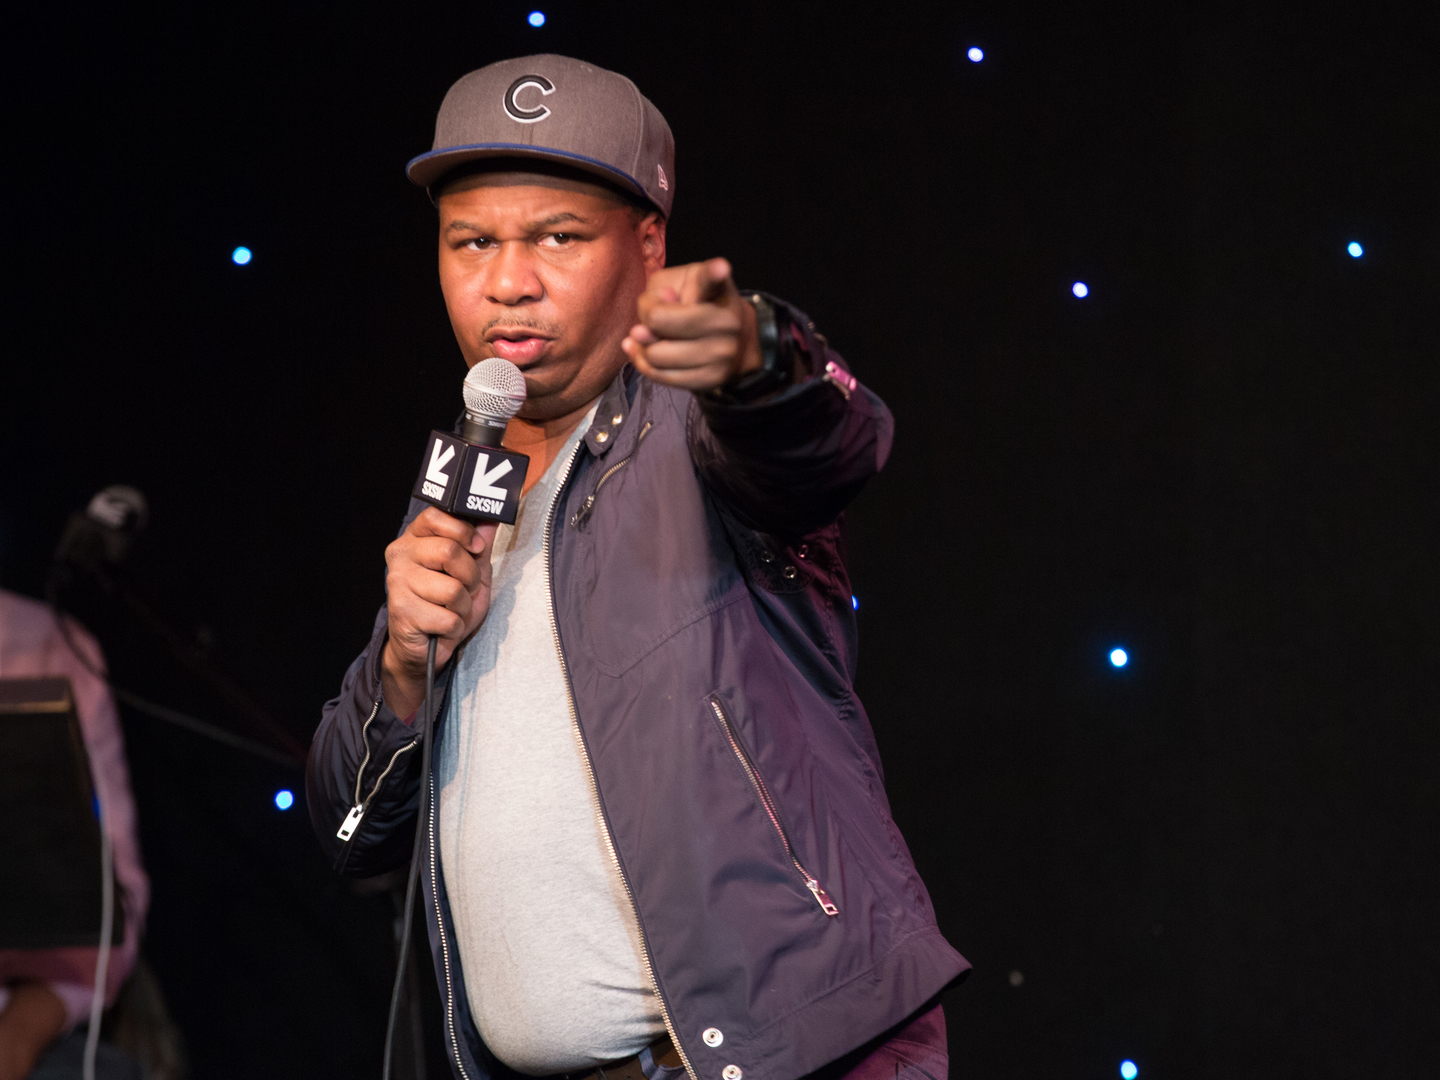 Roy Wood Jr. at the Butterboy Comedy Show. Photo by Jay Nicholas